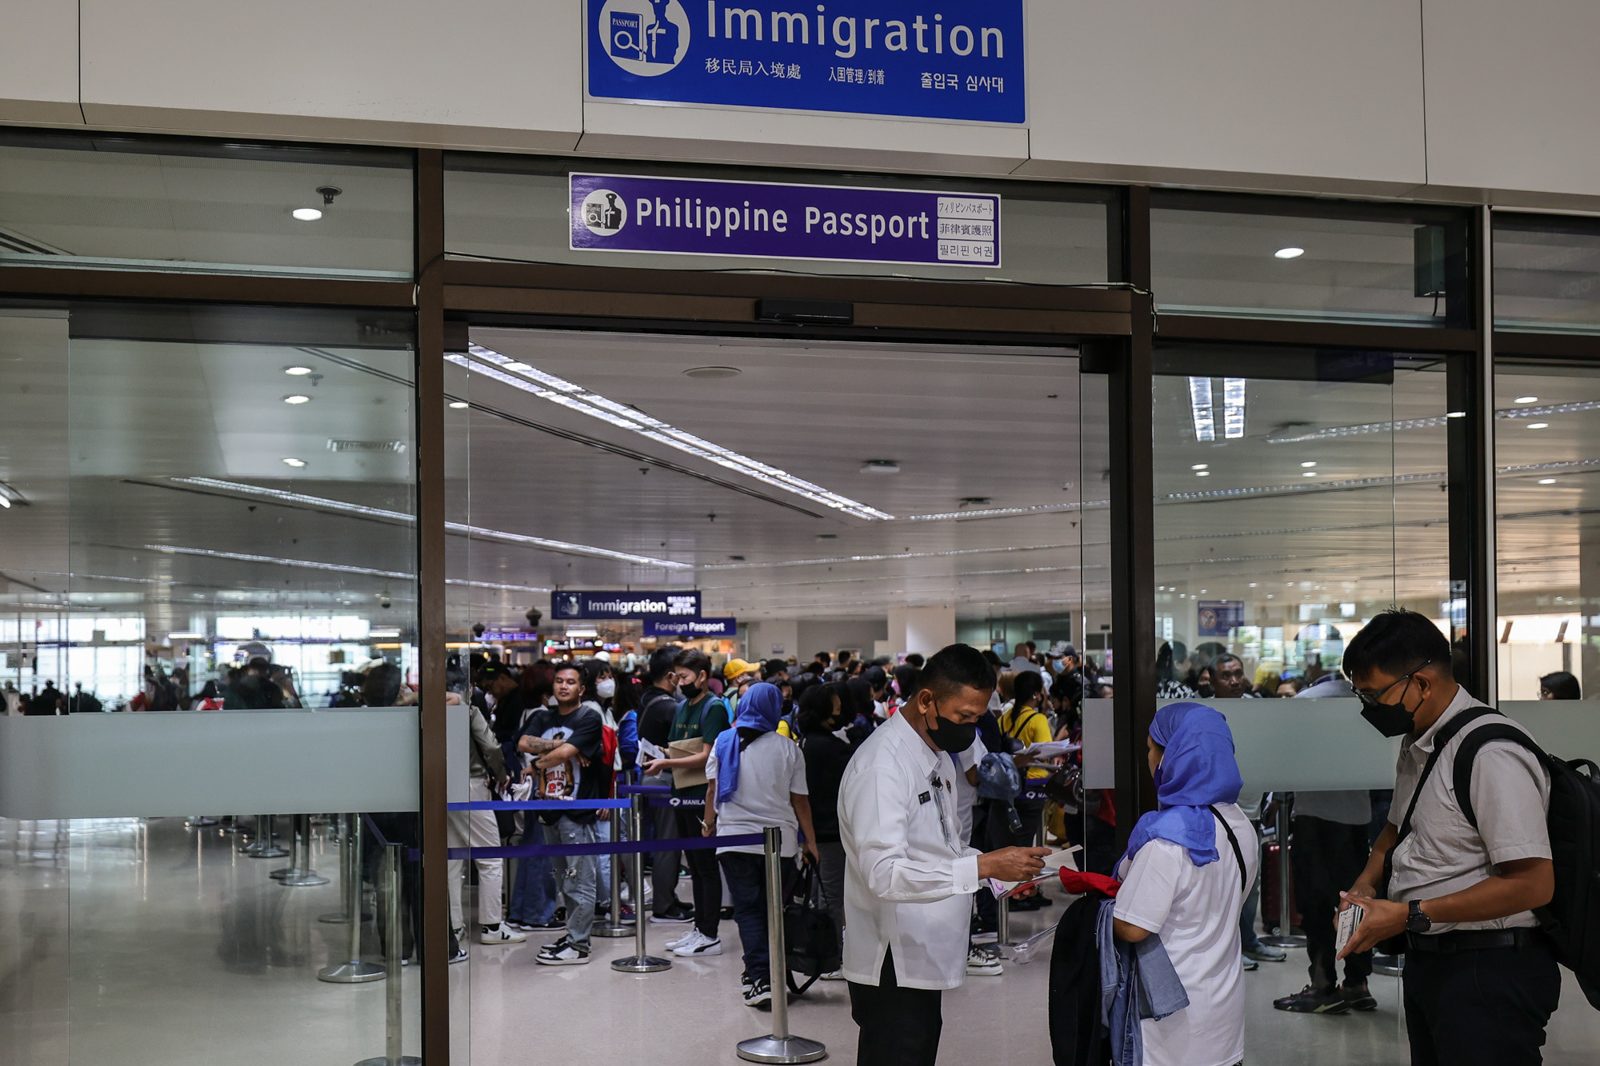 LIST: Immigration requirements for different categories of Filipino travelers